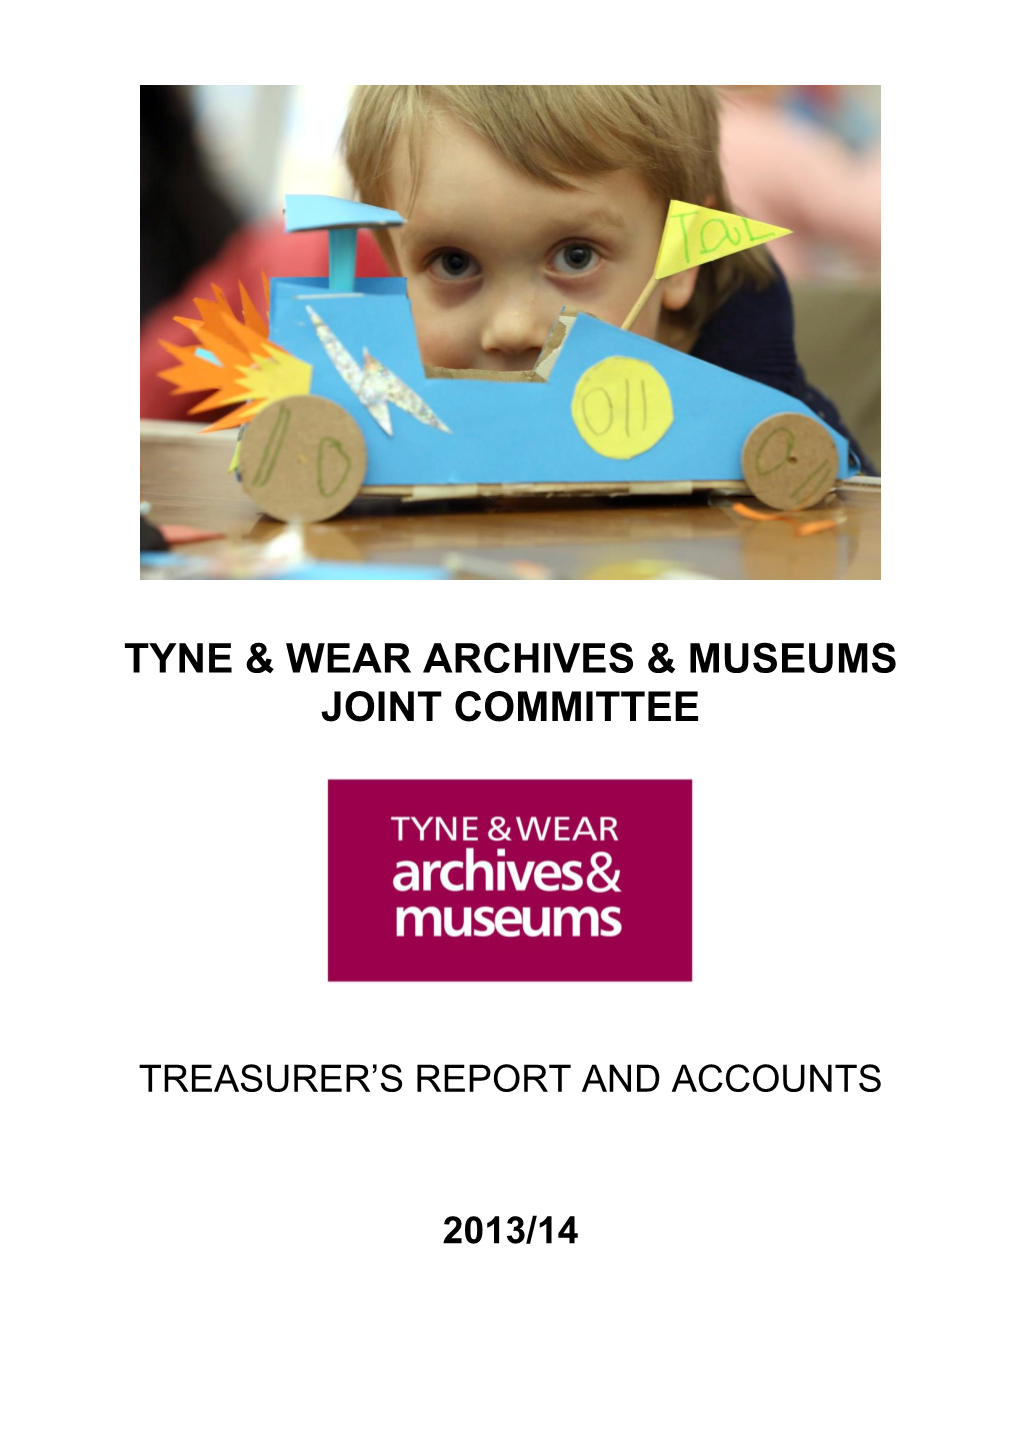 Explanatory Foreword by the Treasurer to the Tyne & 5 Wear Archives & Museums Joint Committee